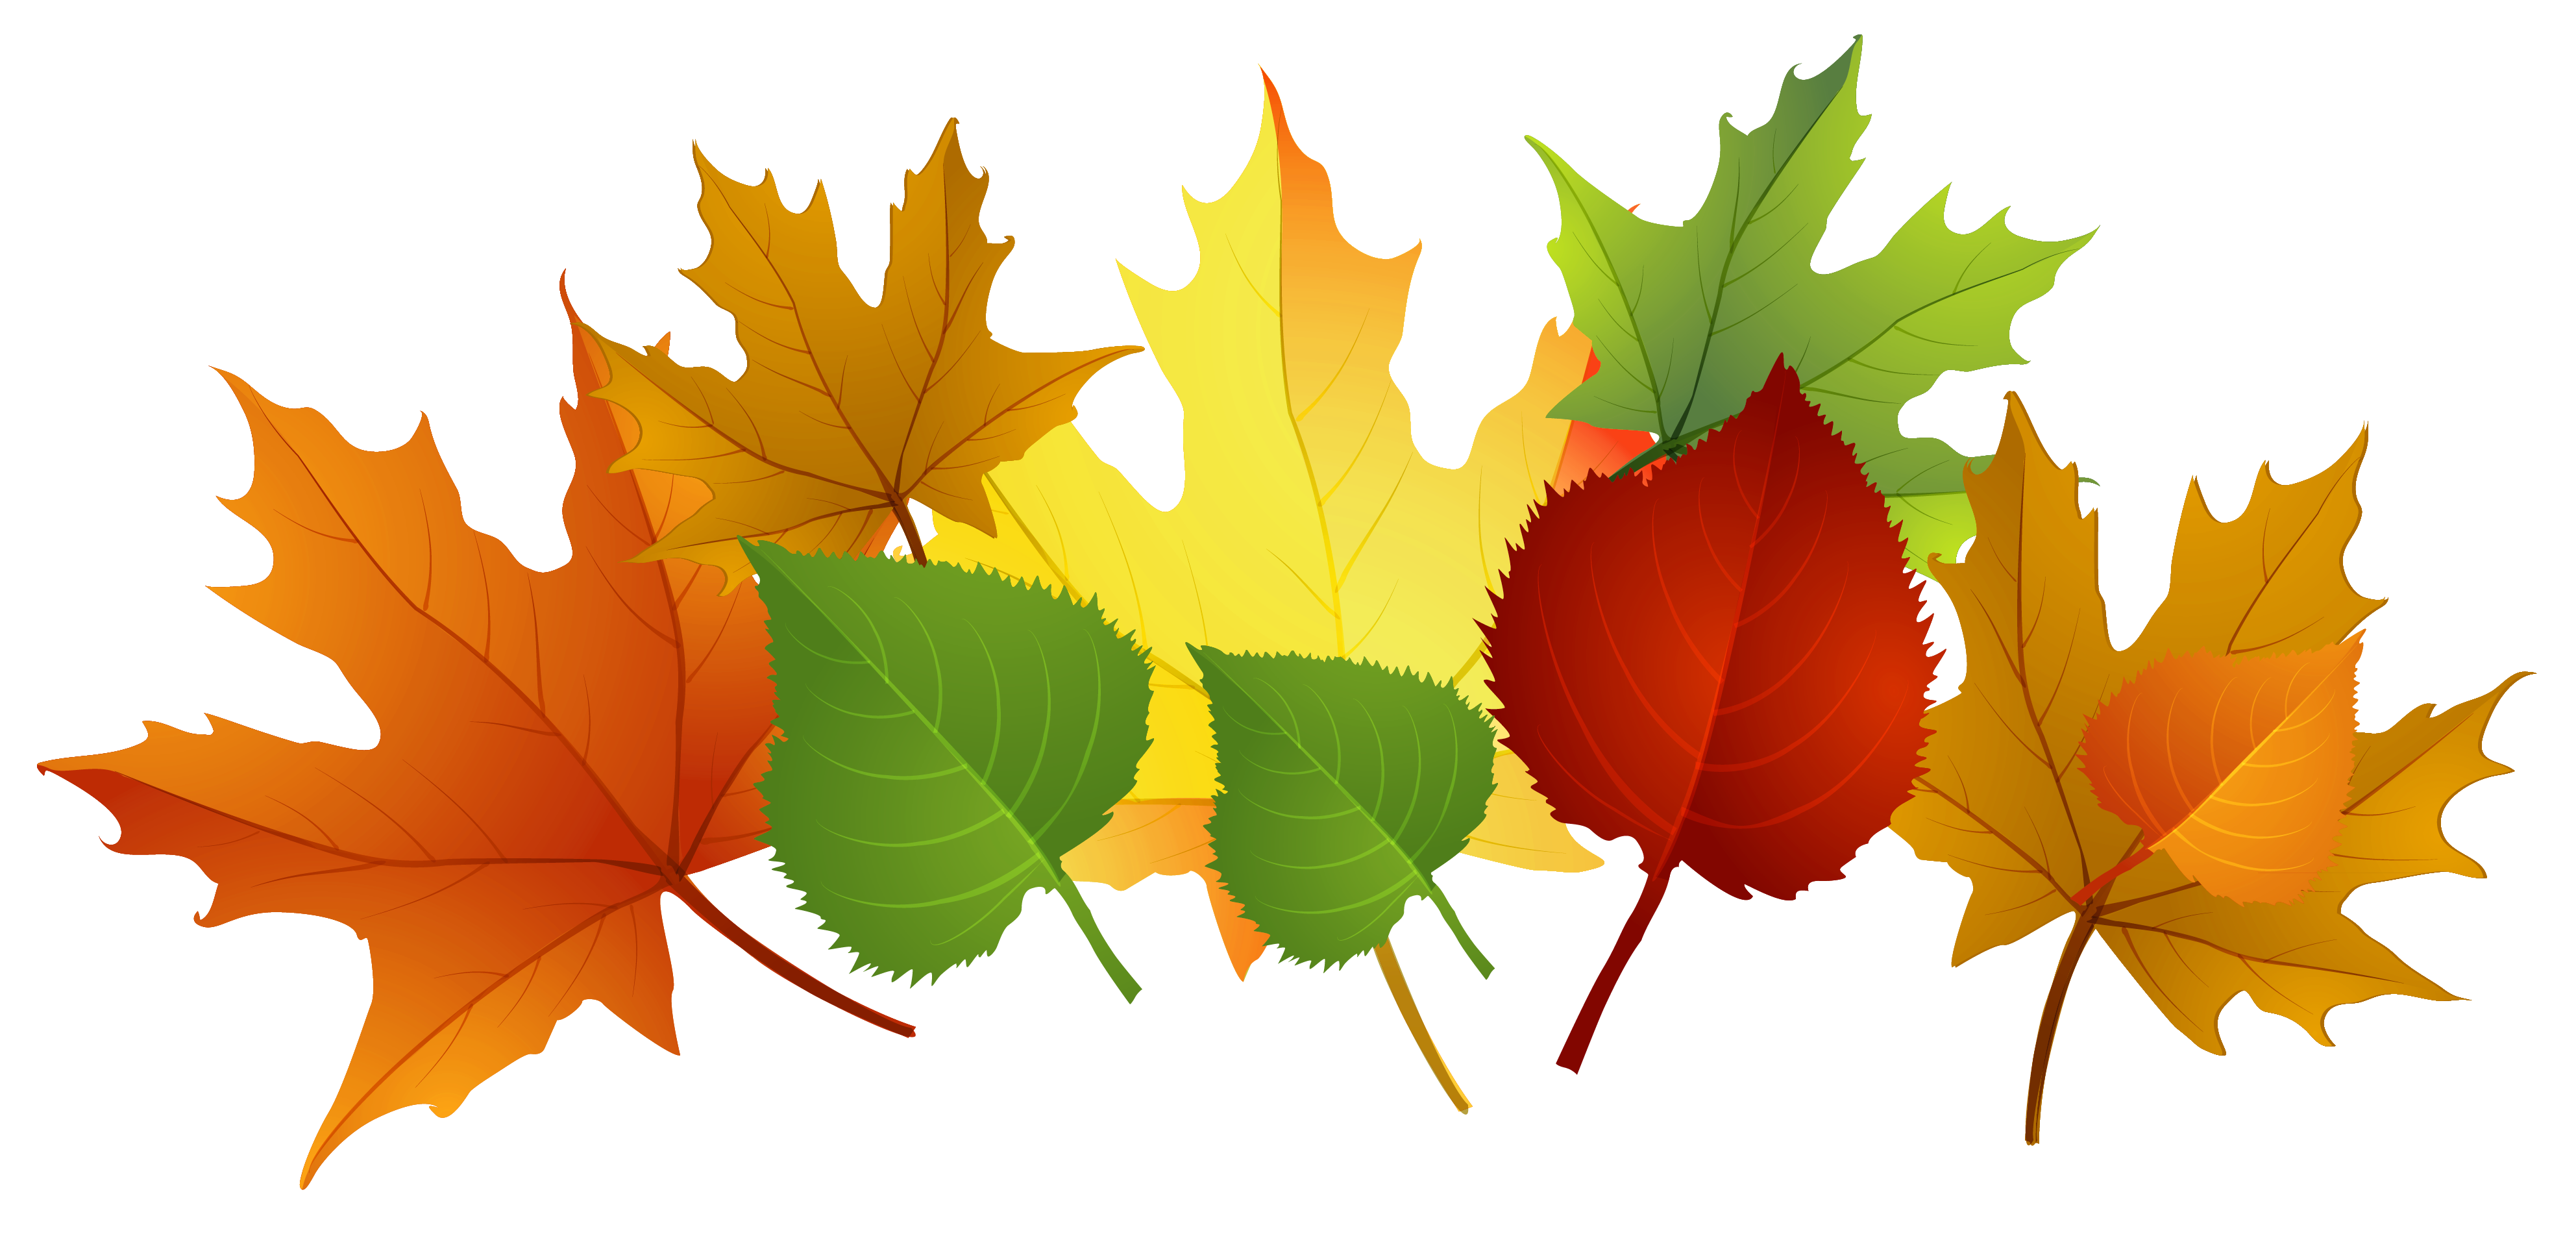 Fall Clip Art Images Free Cli - Autumn Leaves Clipart